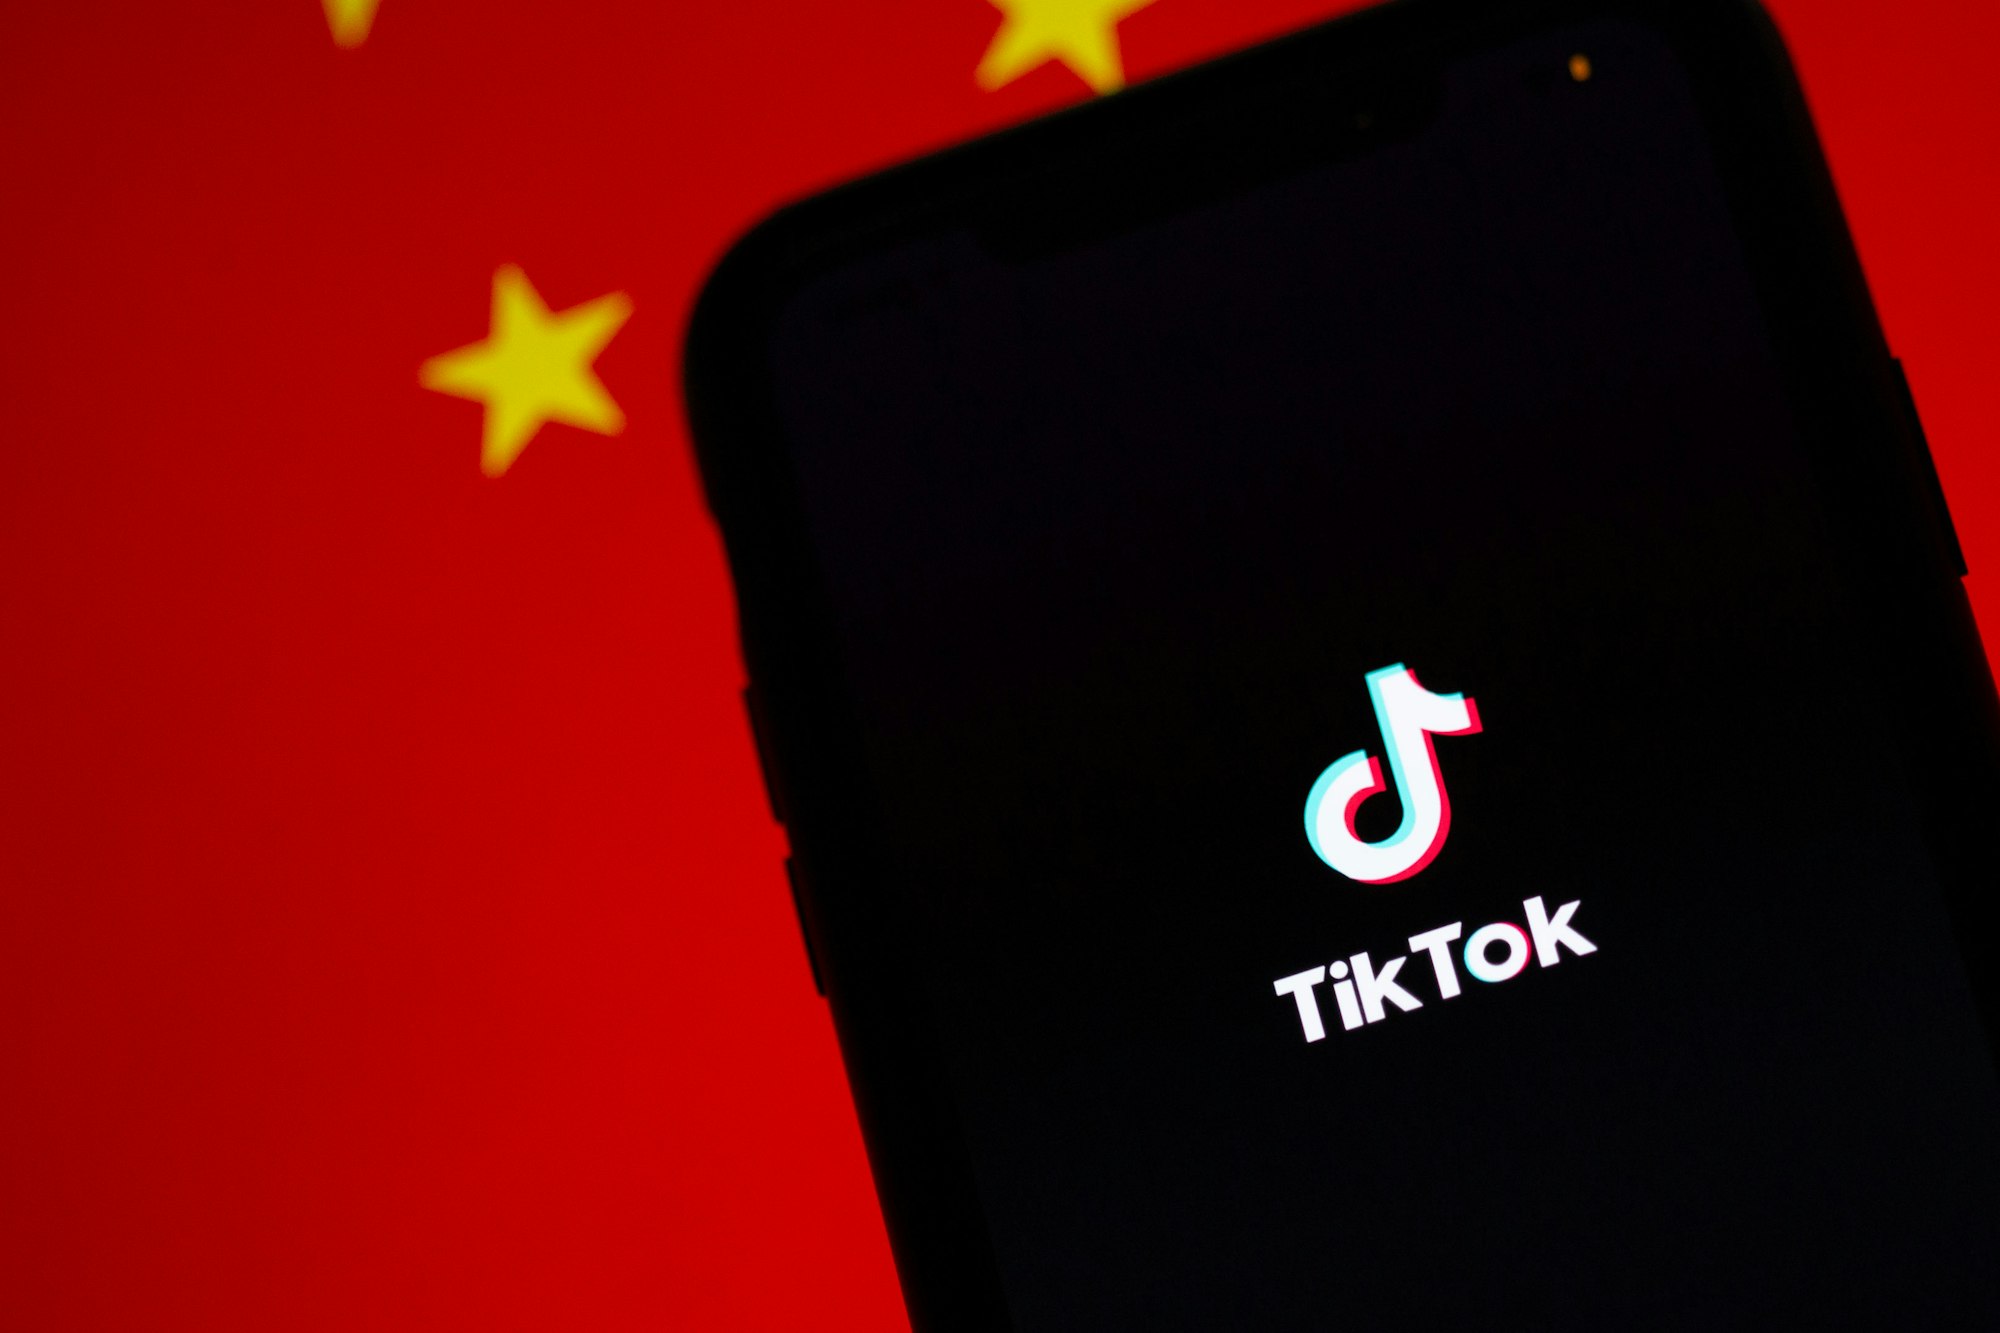 A smart phone showing the TikTok launch screen contrasted with a red background resembling a part of the Chinese Flag.